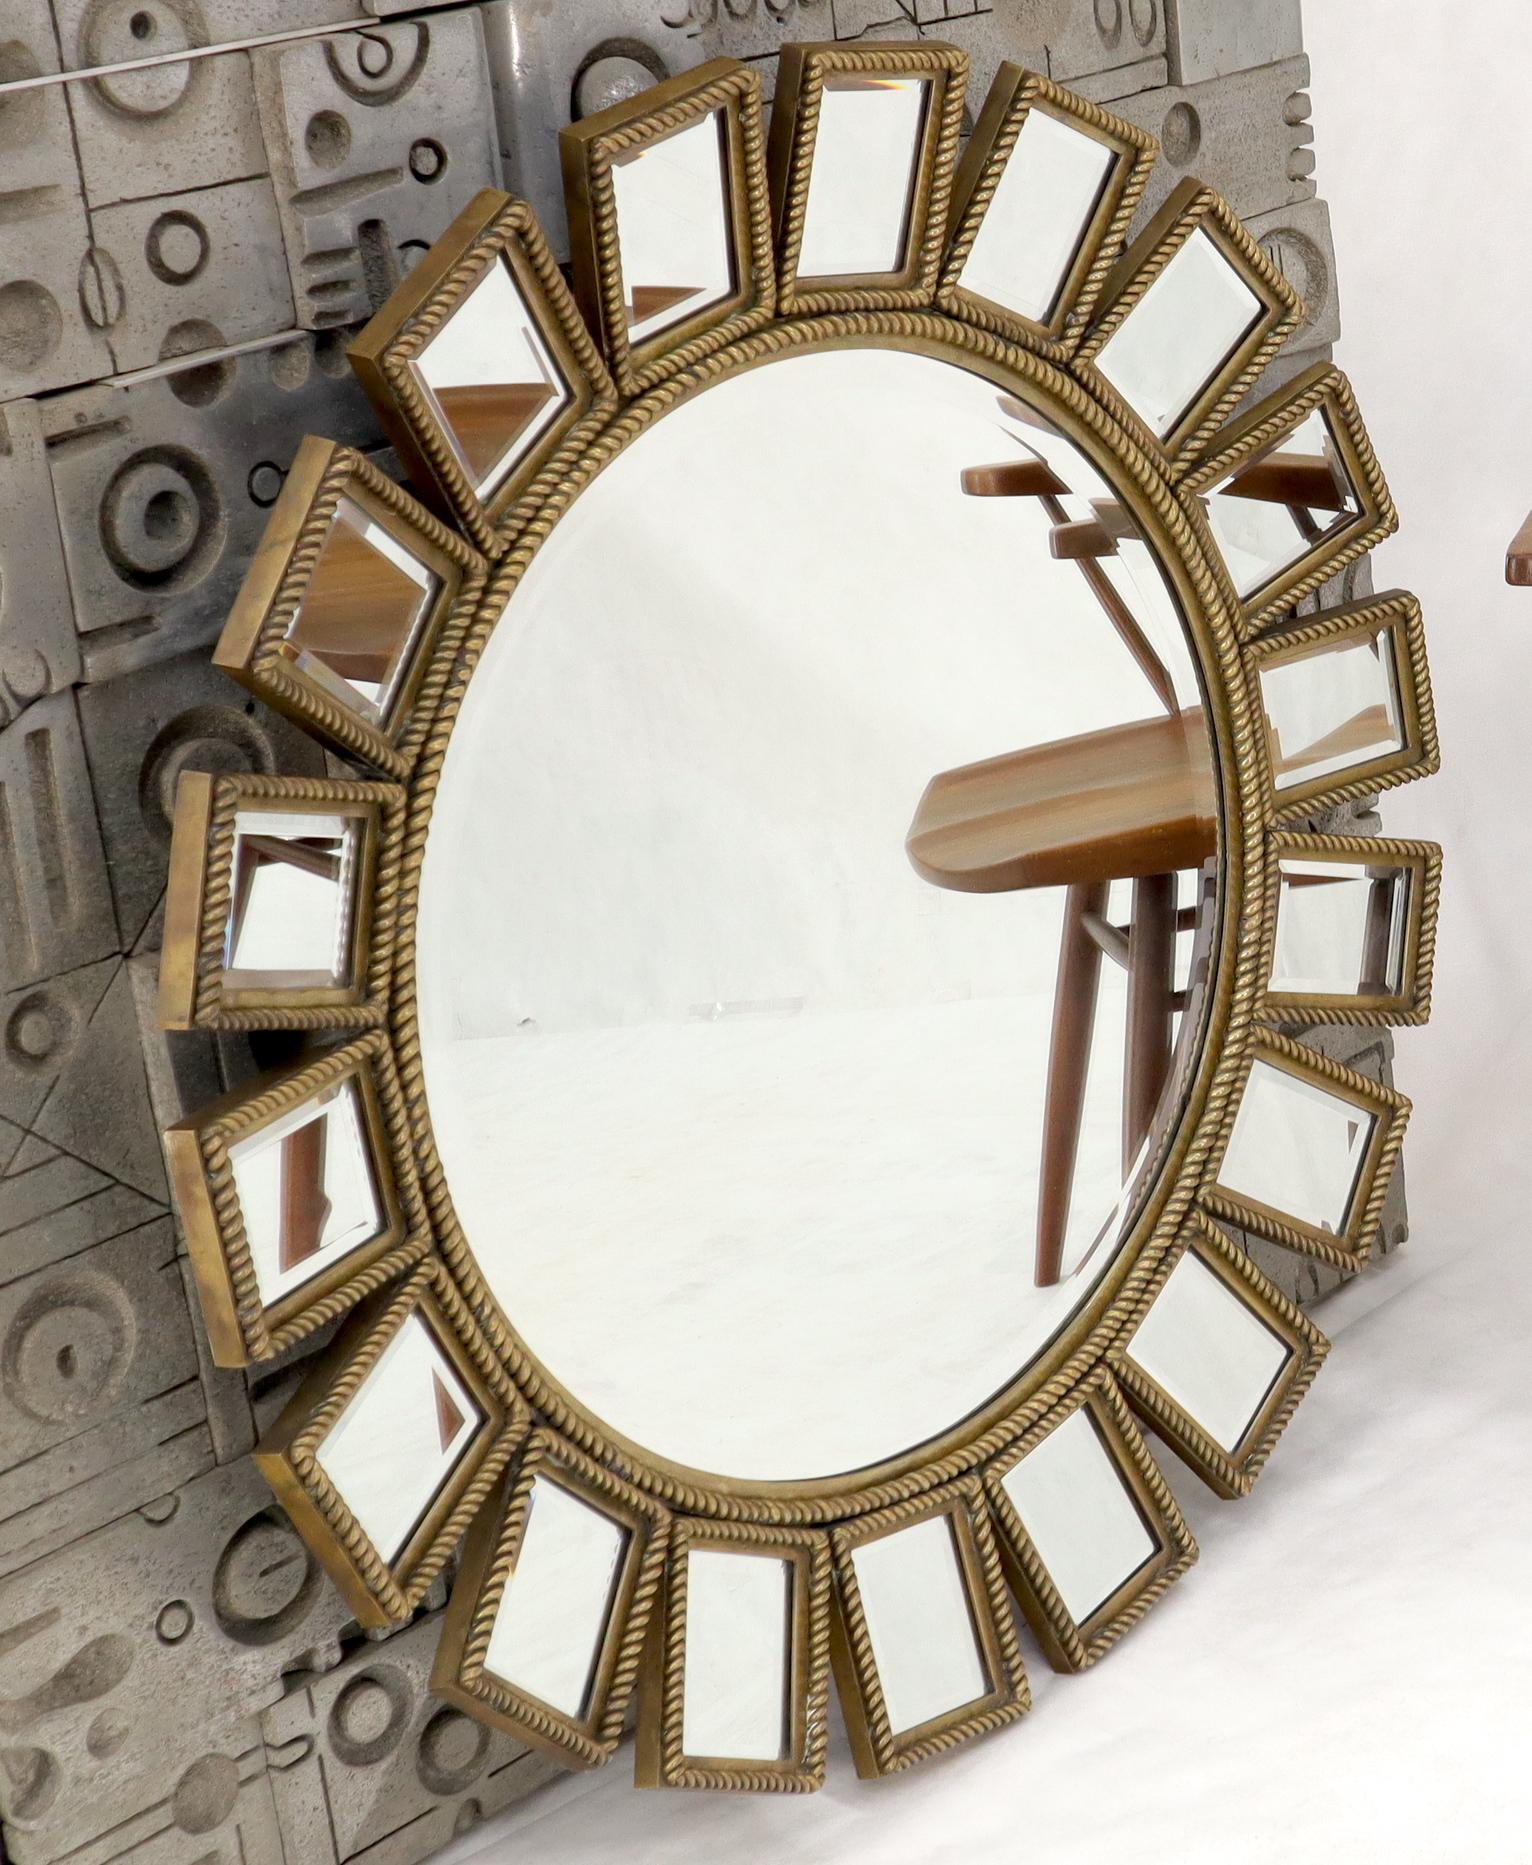 20th Century Heavy Round Brass or Bronze Sunburst Wall Mirror with Rope Edges For Sale